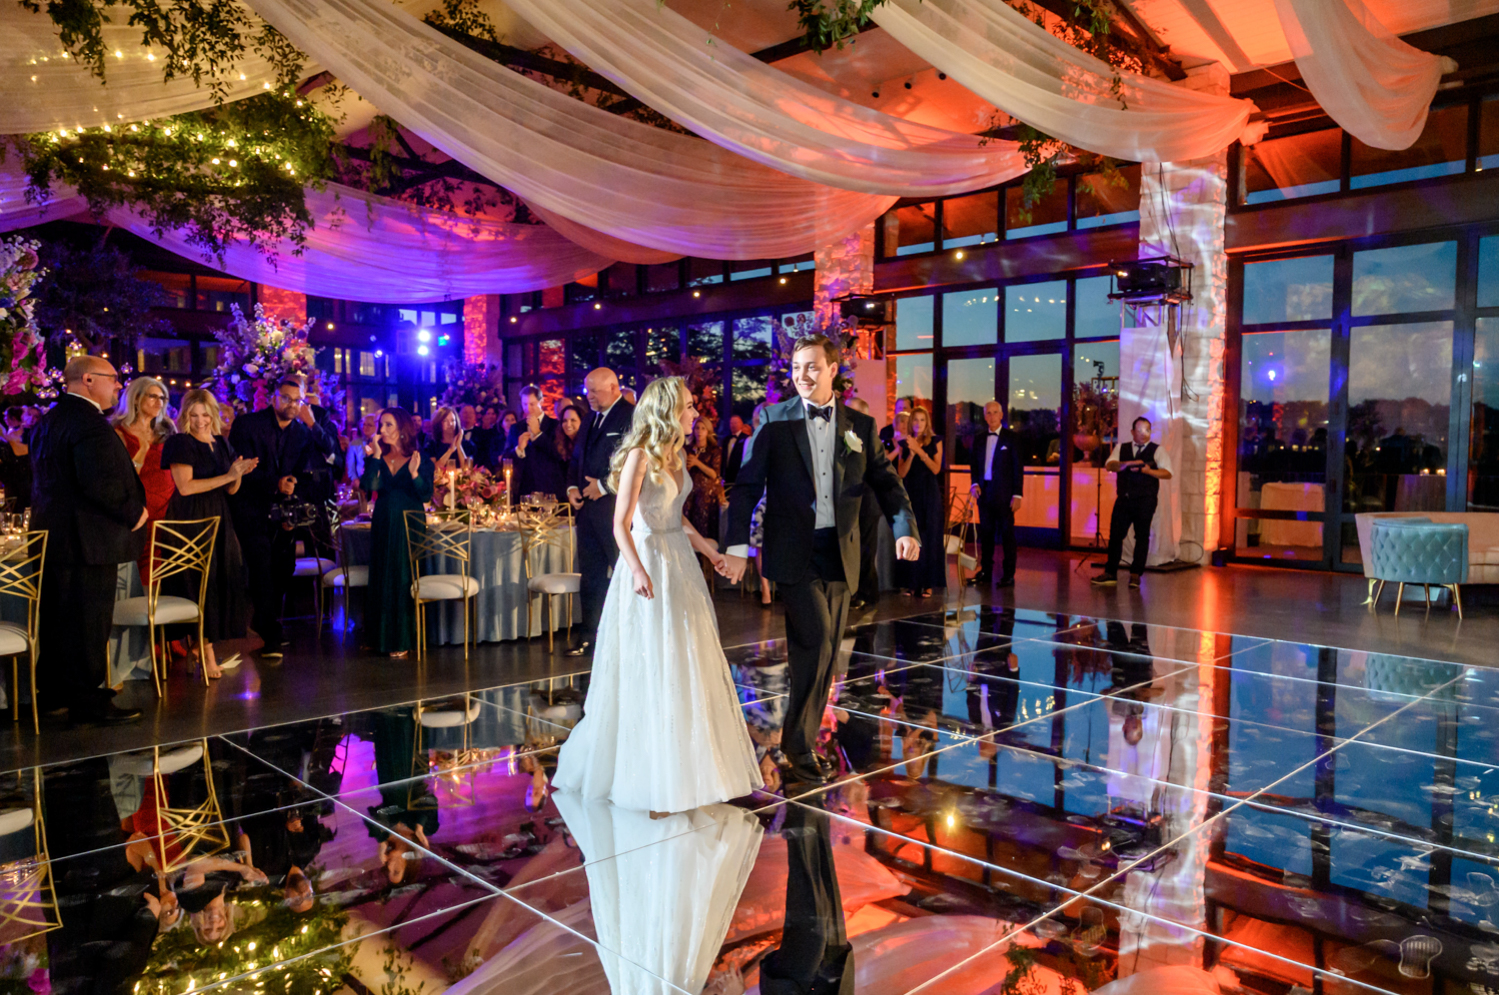 The bride and groom make their way to the shining, reflective dance floor for their first dance.